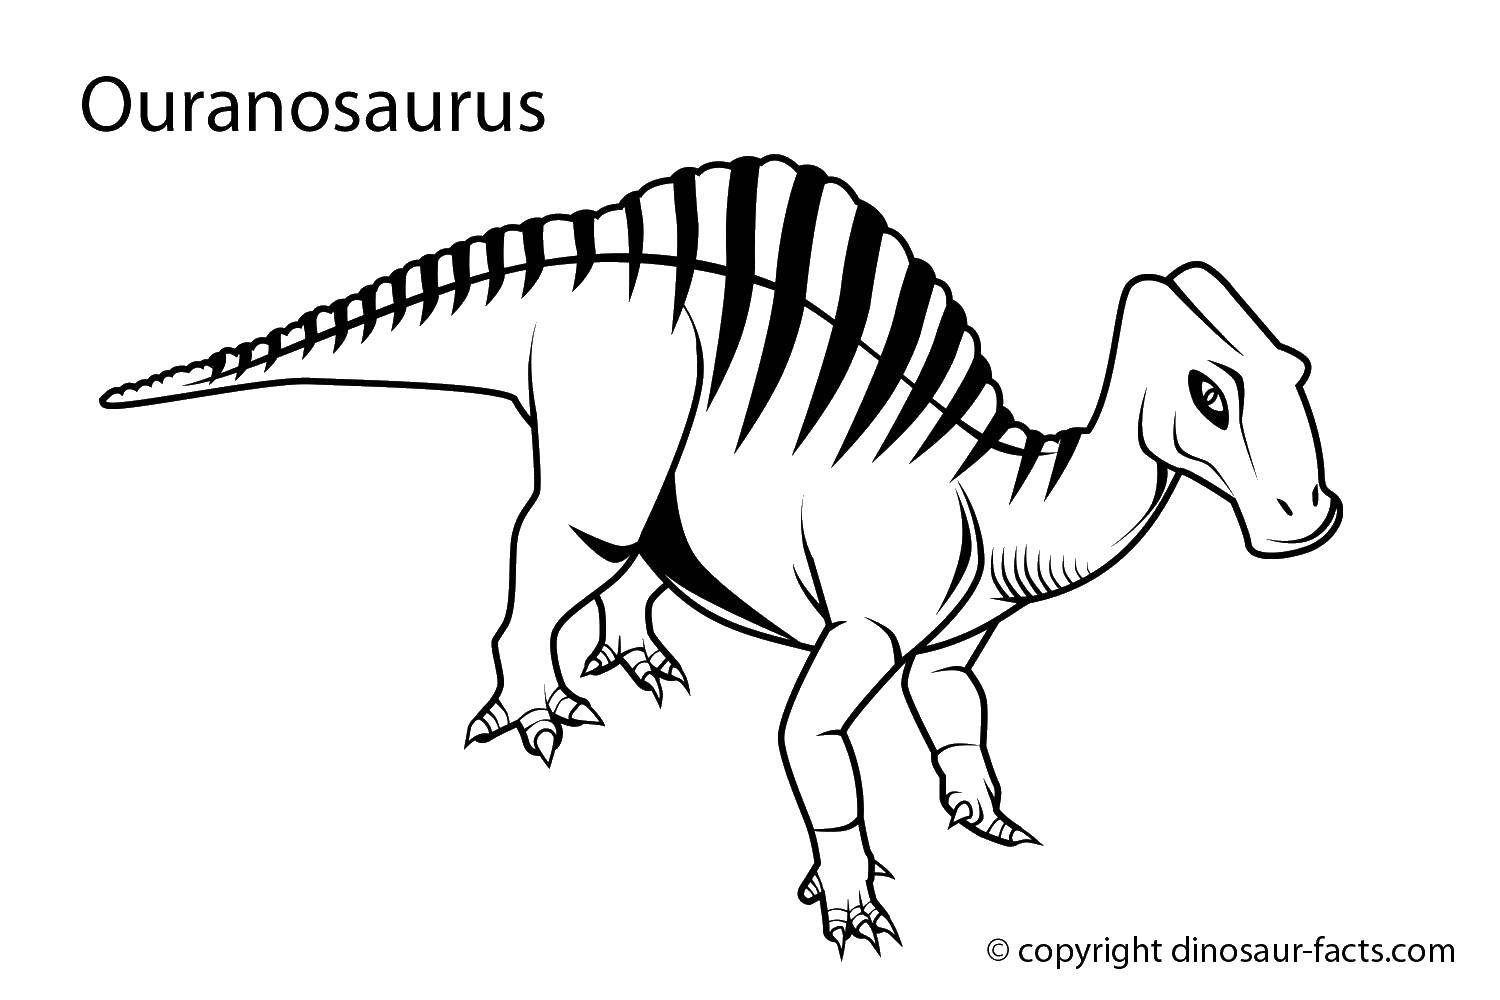 Coloring Oranother. Category dinosaur. Tags:  dinosaurs, oranother.